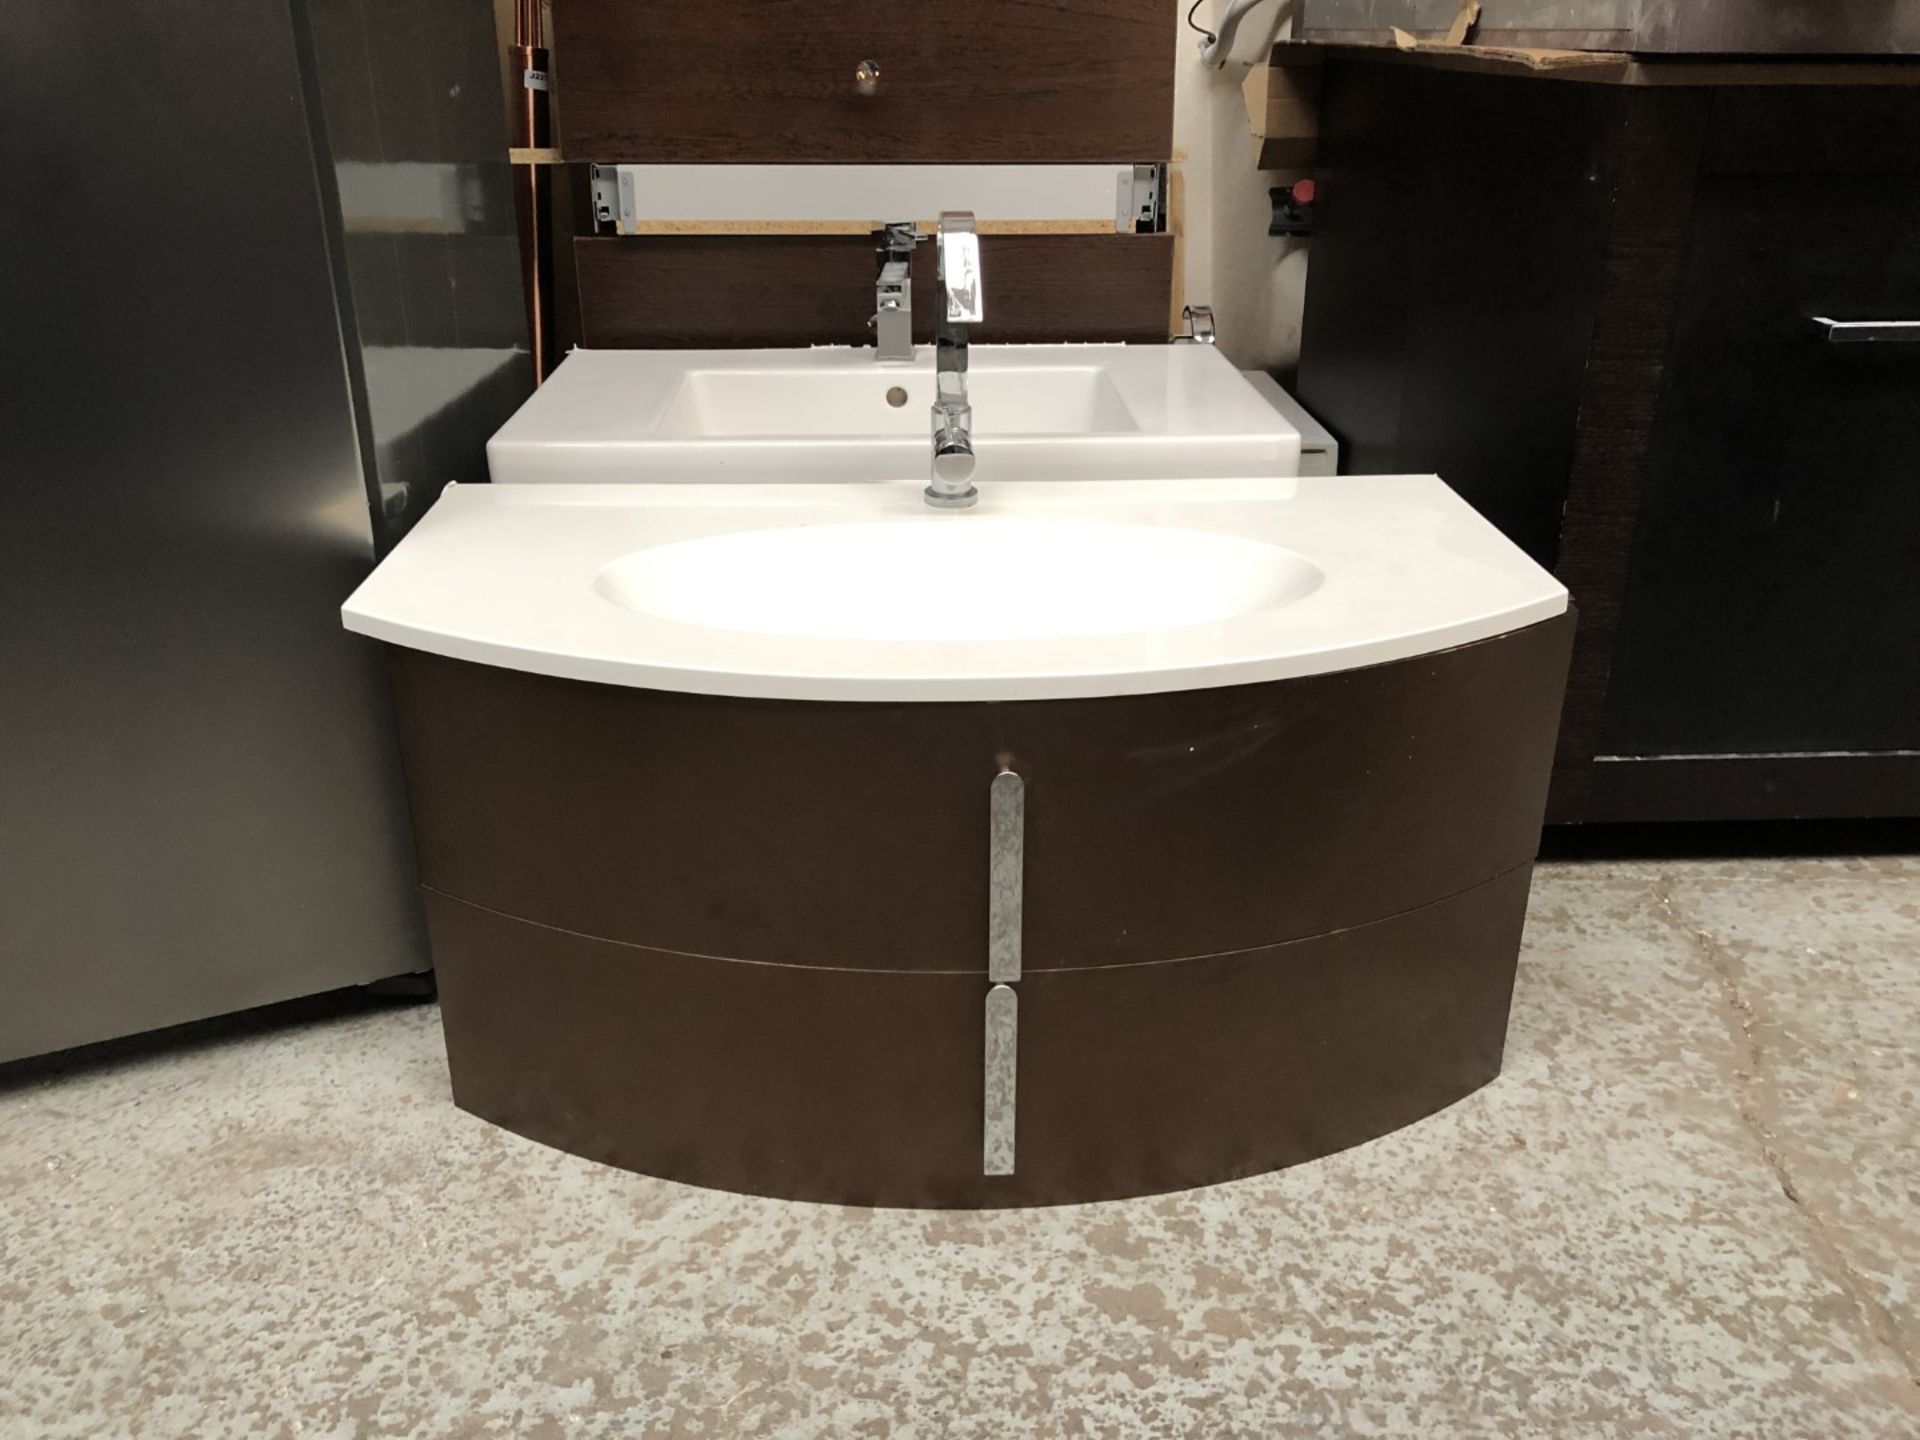 1 x D Shaped White Ceramic Sink With A Large Wooden 2-Drawer Vanity Unit - NC1130 - CL380 - NO VAT - Image 3 of 3